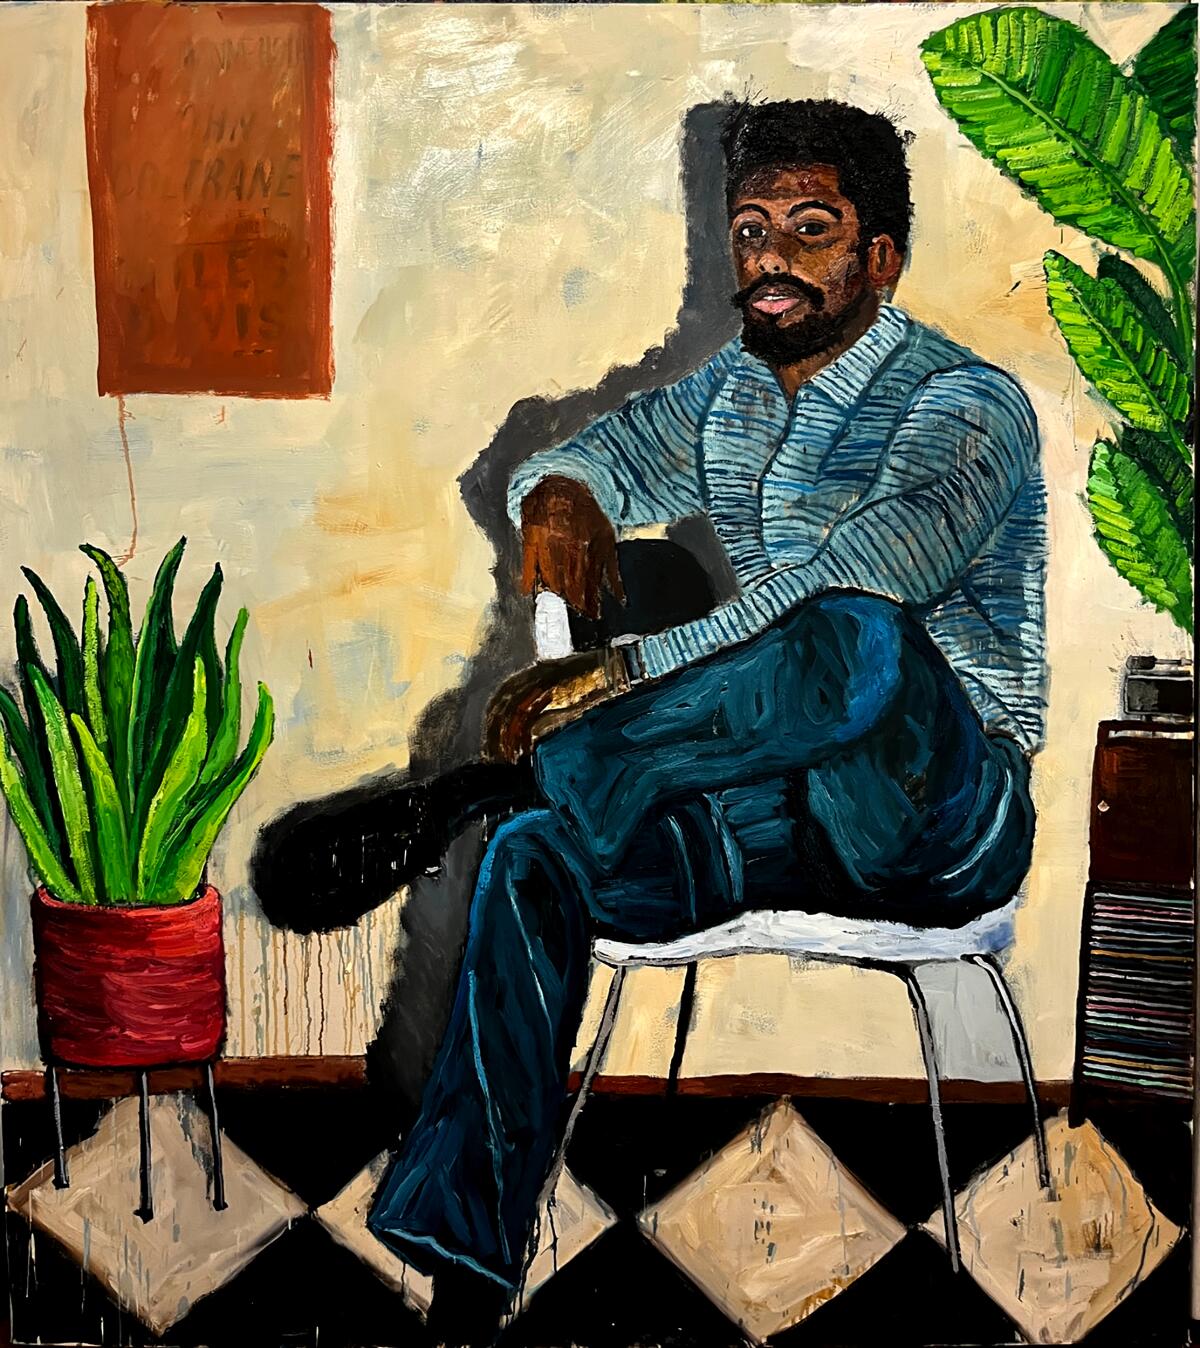 A painting of a man sitting on a chair with one leg crossed. 